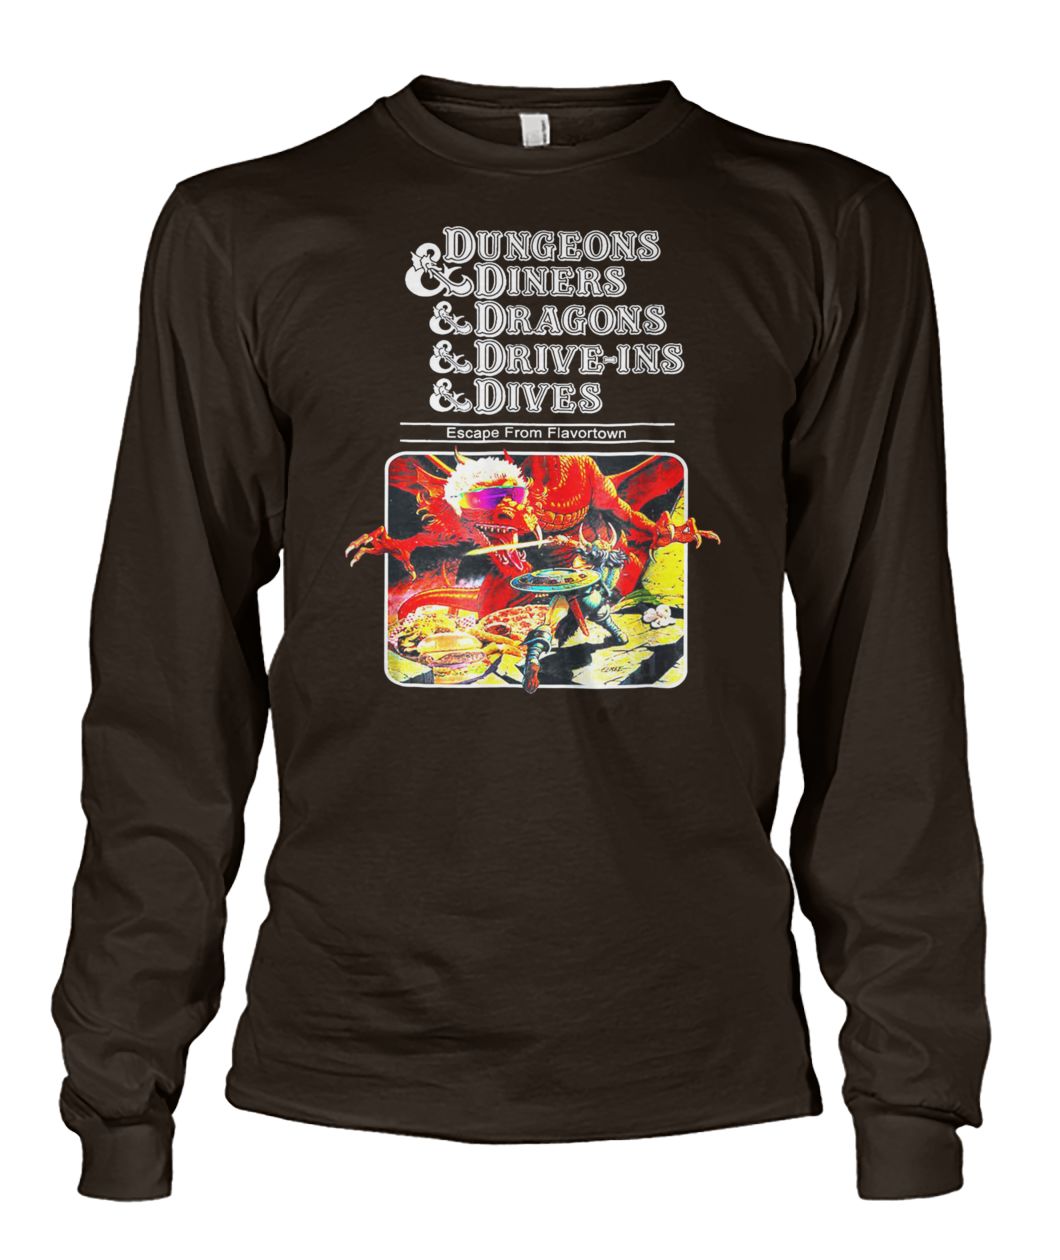 Dungeons and diners dragons drive-ins dives slightly unisex long sleeve